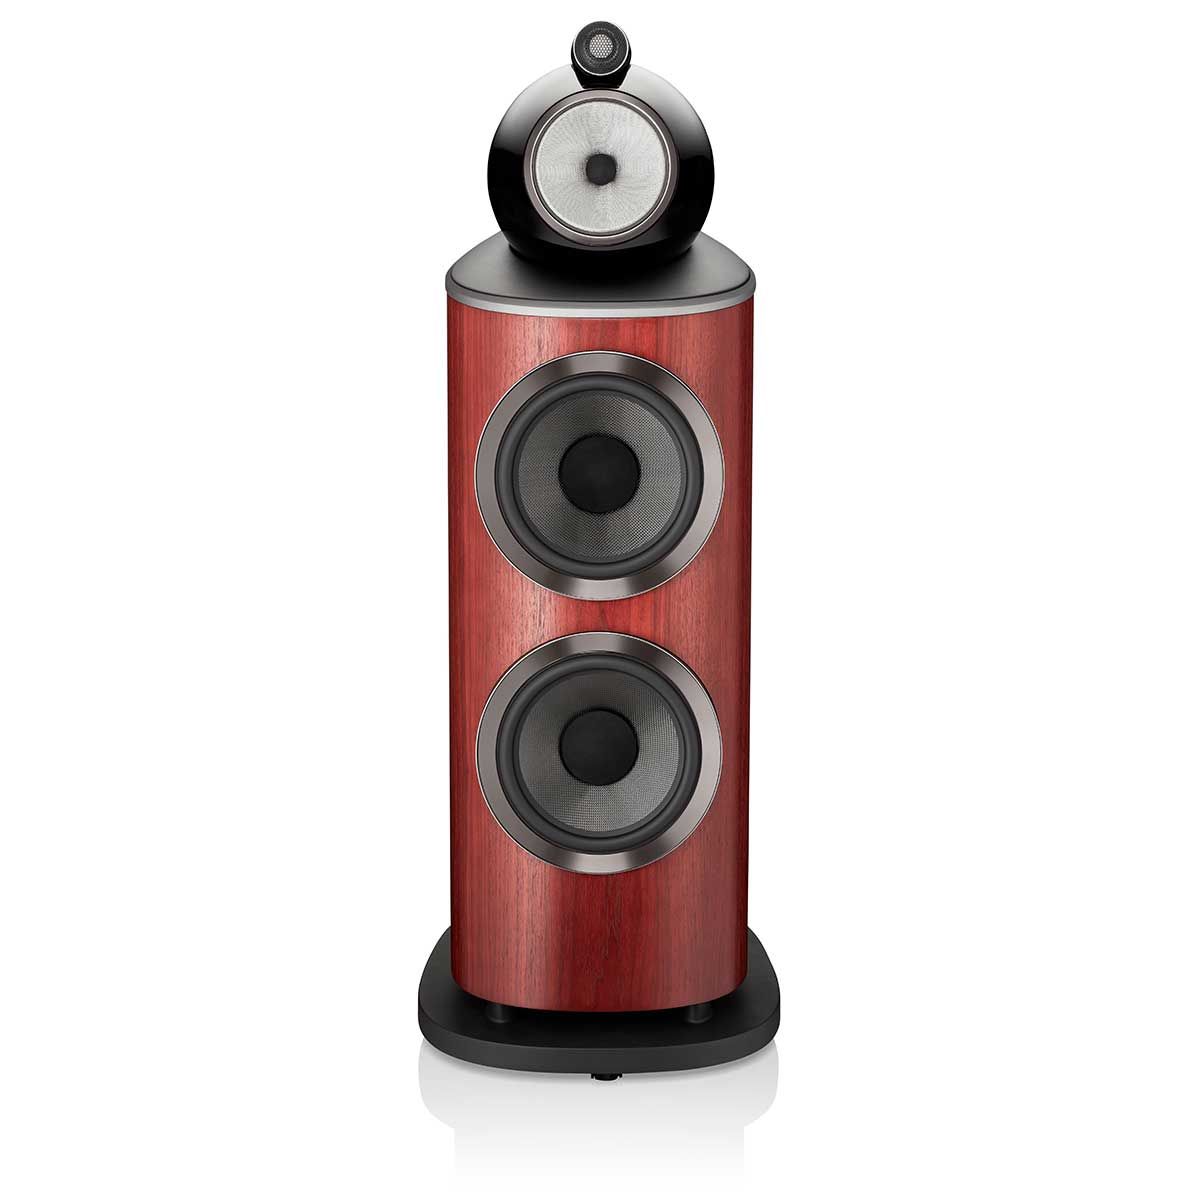 Bowers & Wilkins 801 D4 Floorstanding Speaker, Rosenut, front view without grille